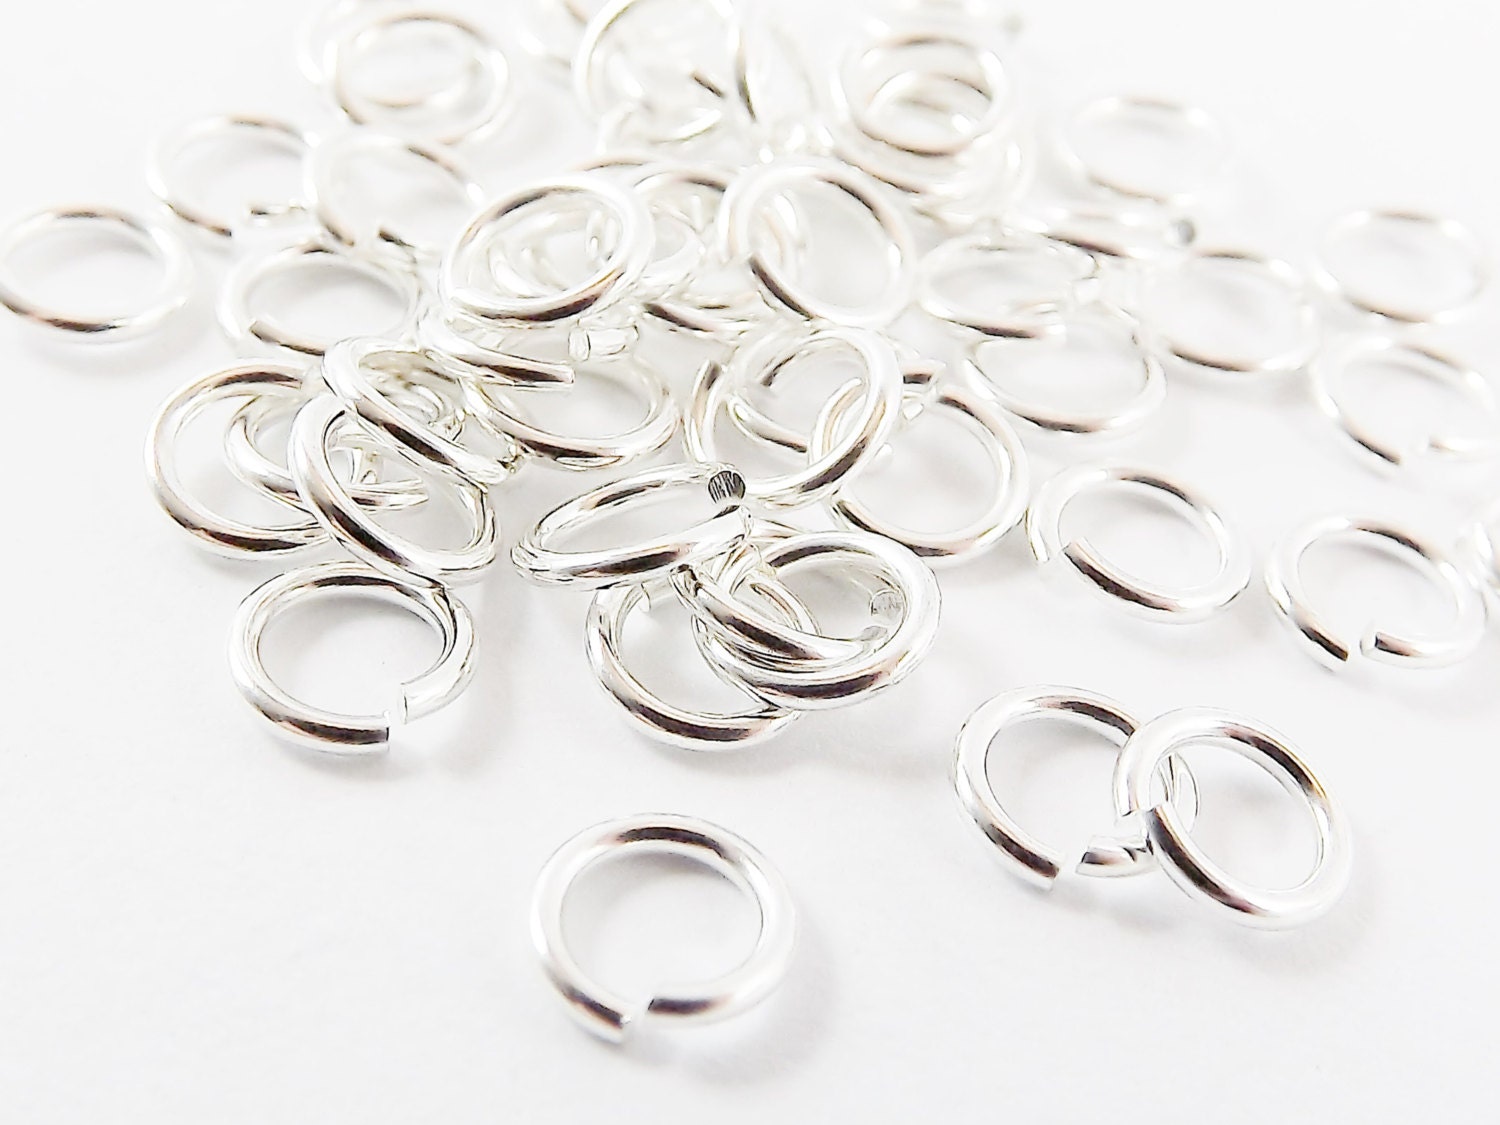 50 pcs - 6mm Bright Shiny Silver Plated Brass jumprings